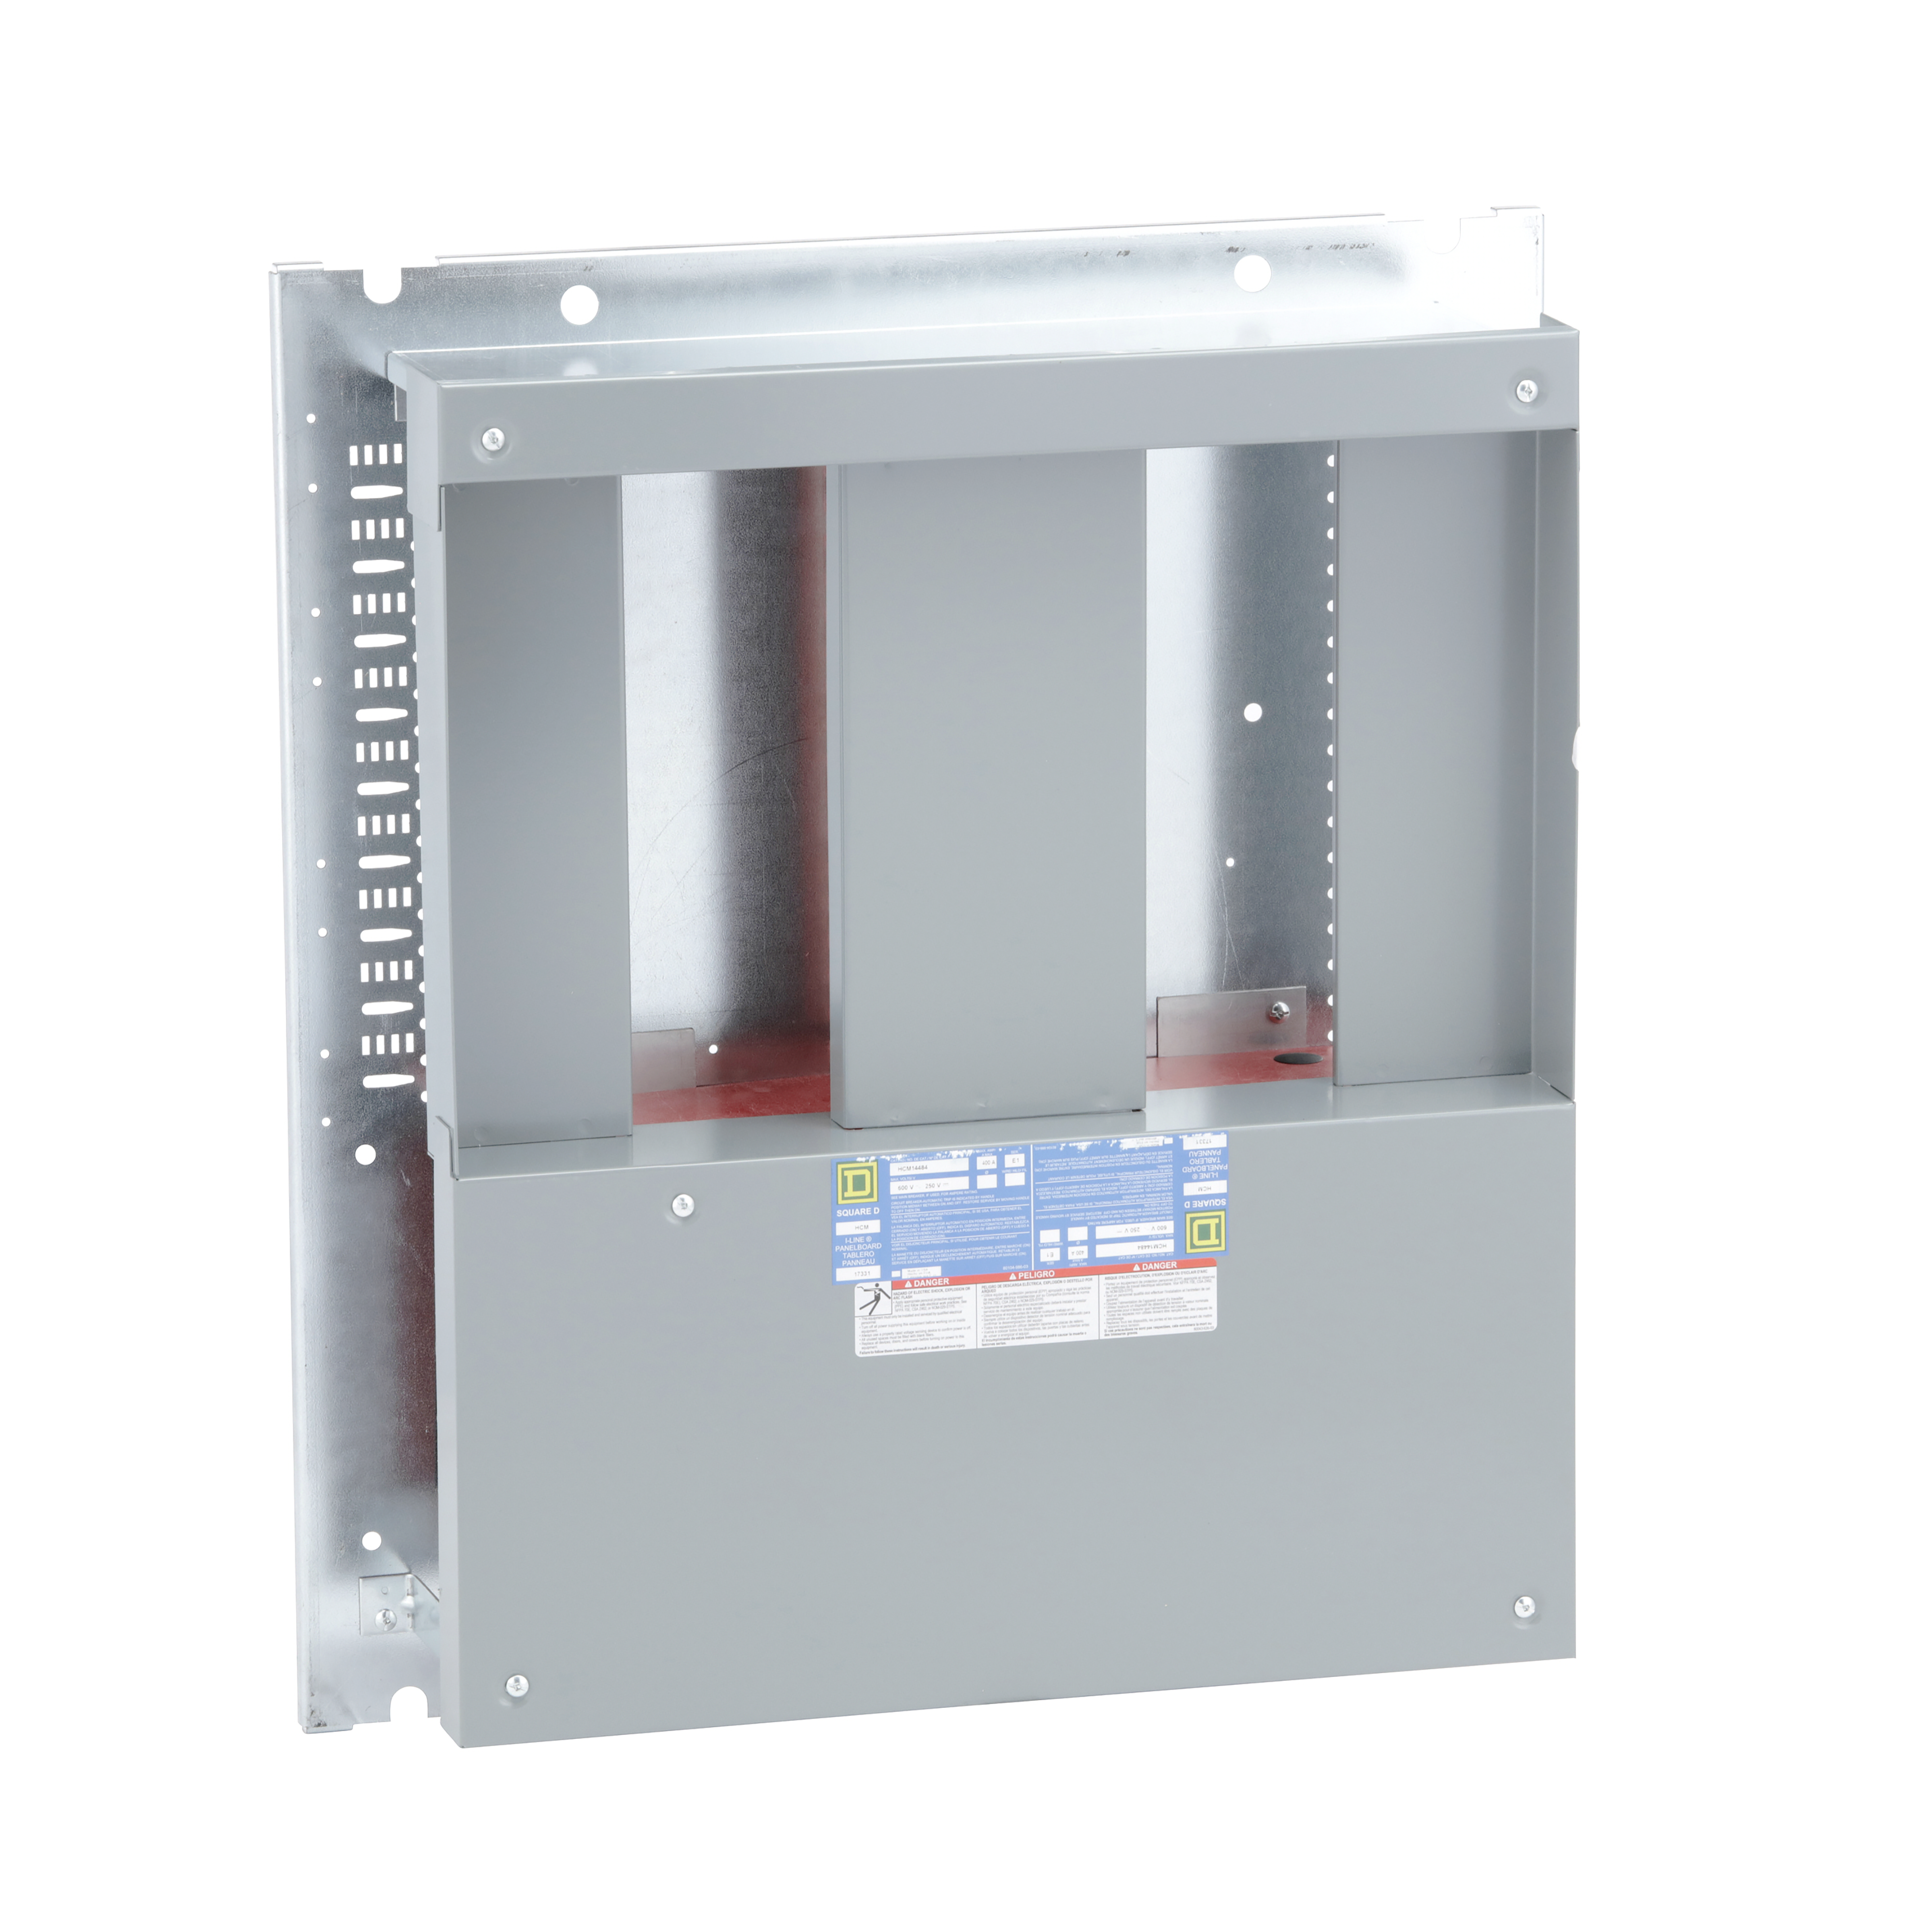 Interior, I-Line Panelboard, HCJ, 400A, main lugs, 27in CB space, for 32in W x 48in H x 9.5in D box, Al bus